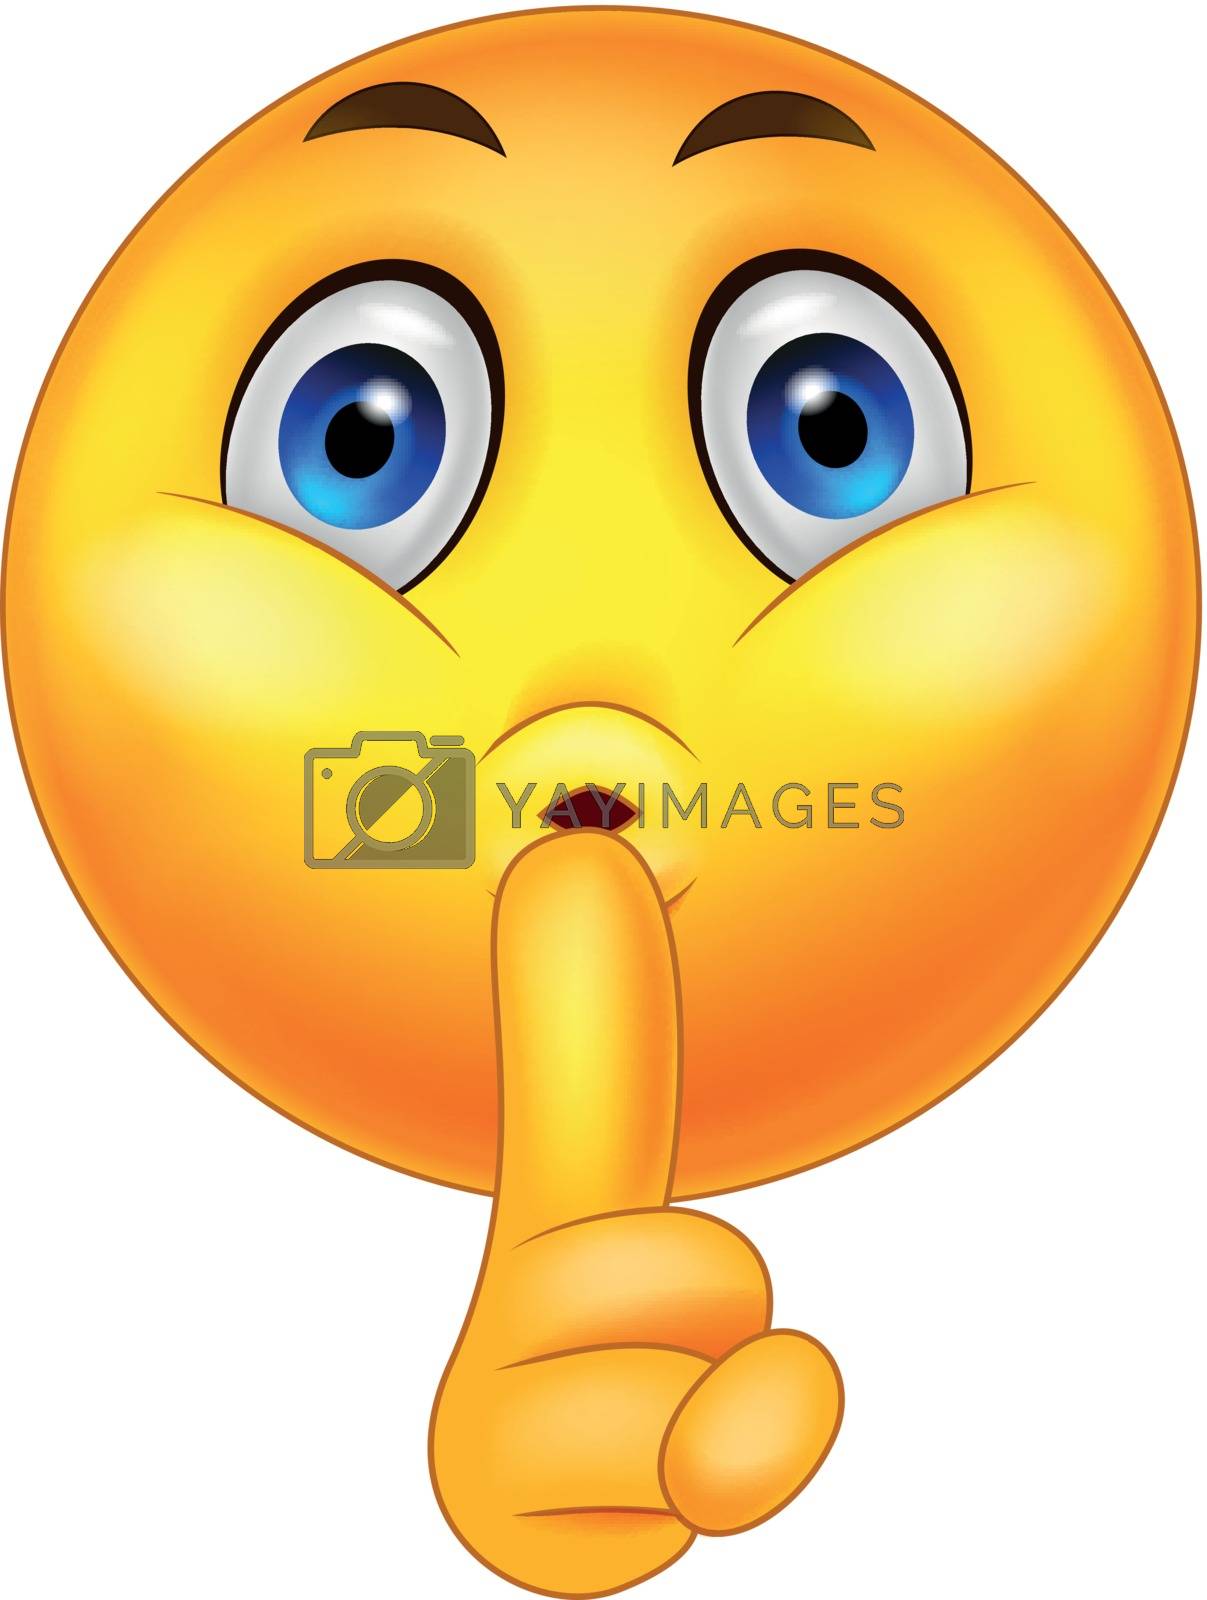 Royalty free image of Emoticon making silence sign by tigatelu